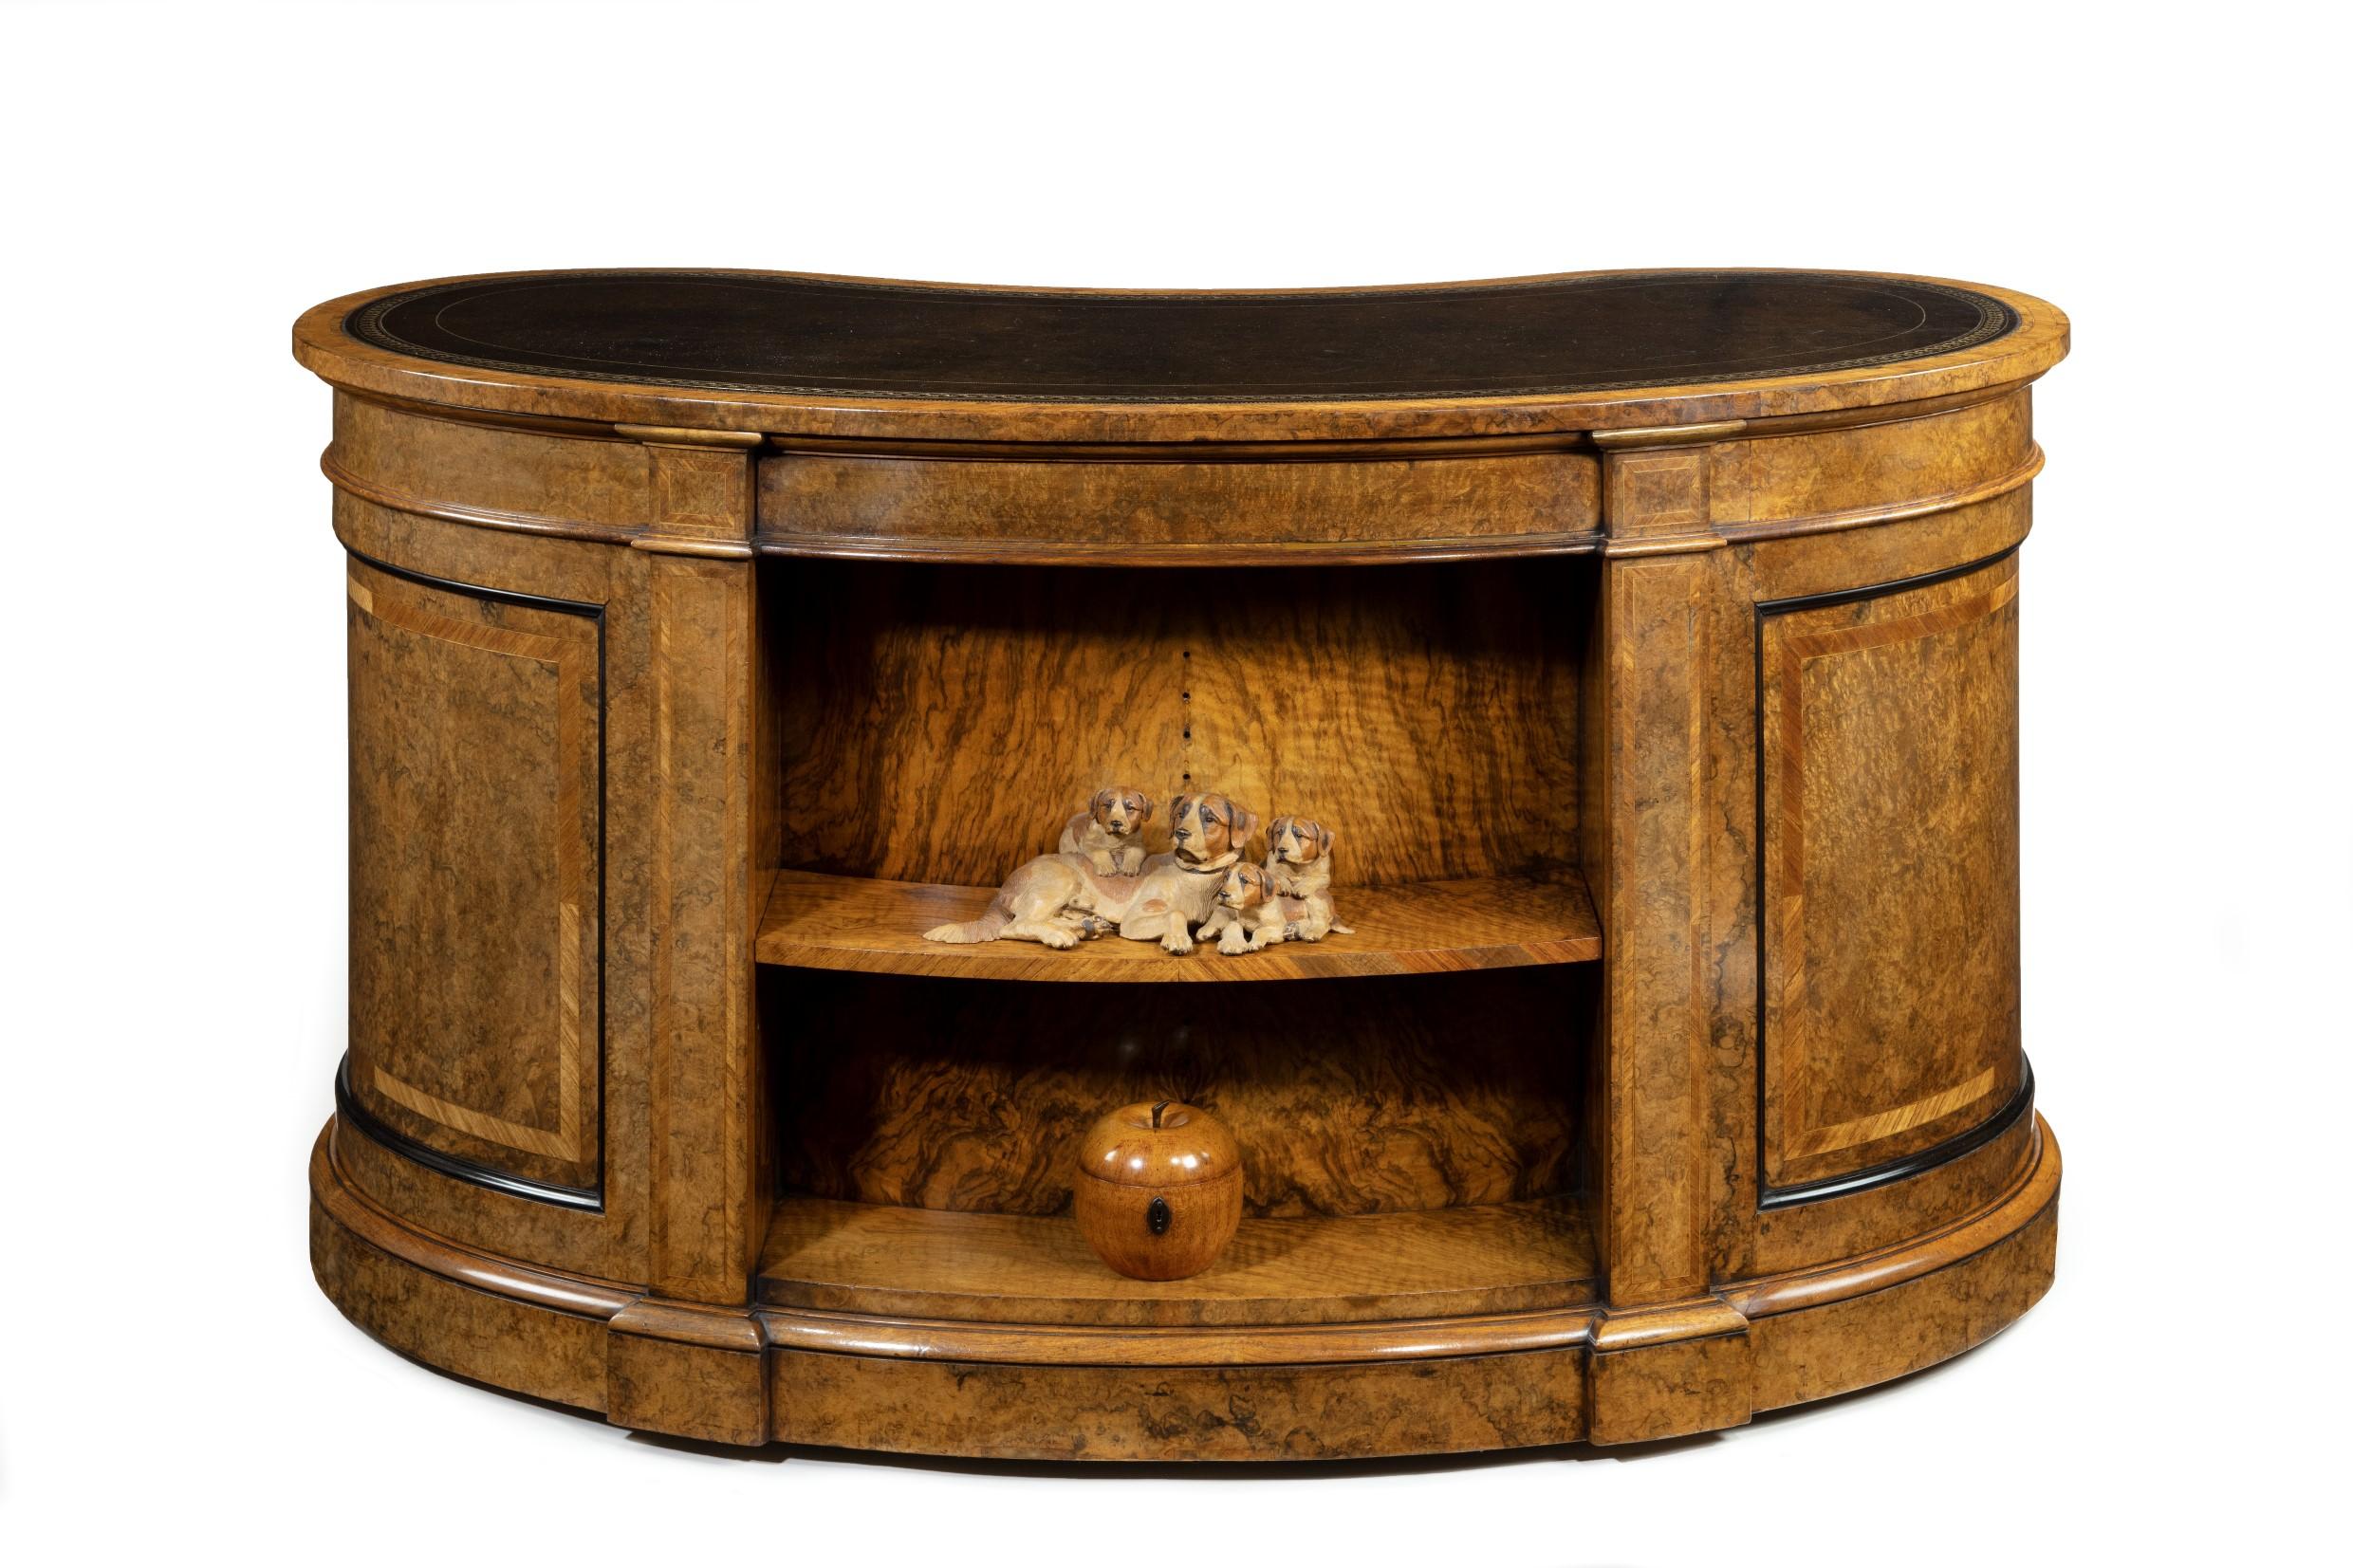 English Fine Quality Victorian Kidney-Shaped Desk in Richly Figured Walnut by Gillows For Sale